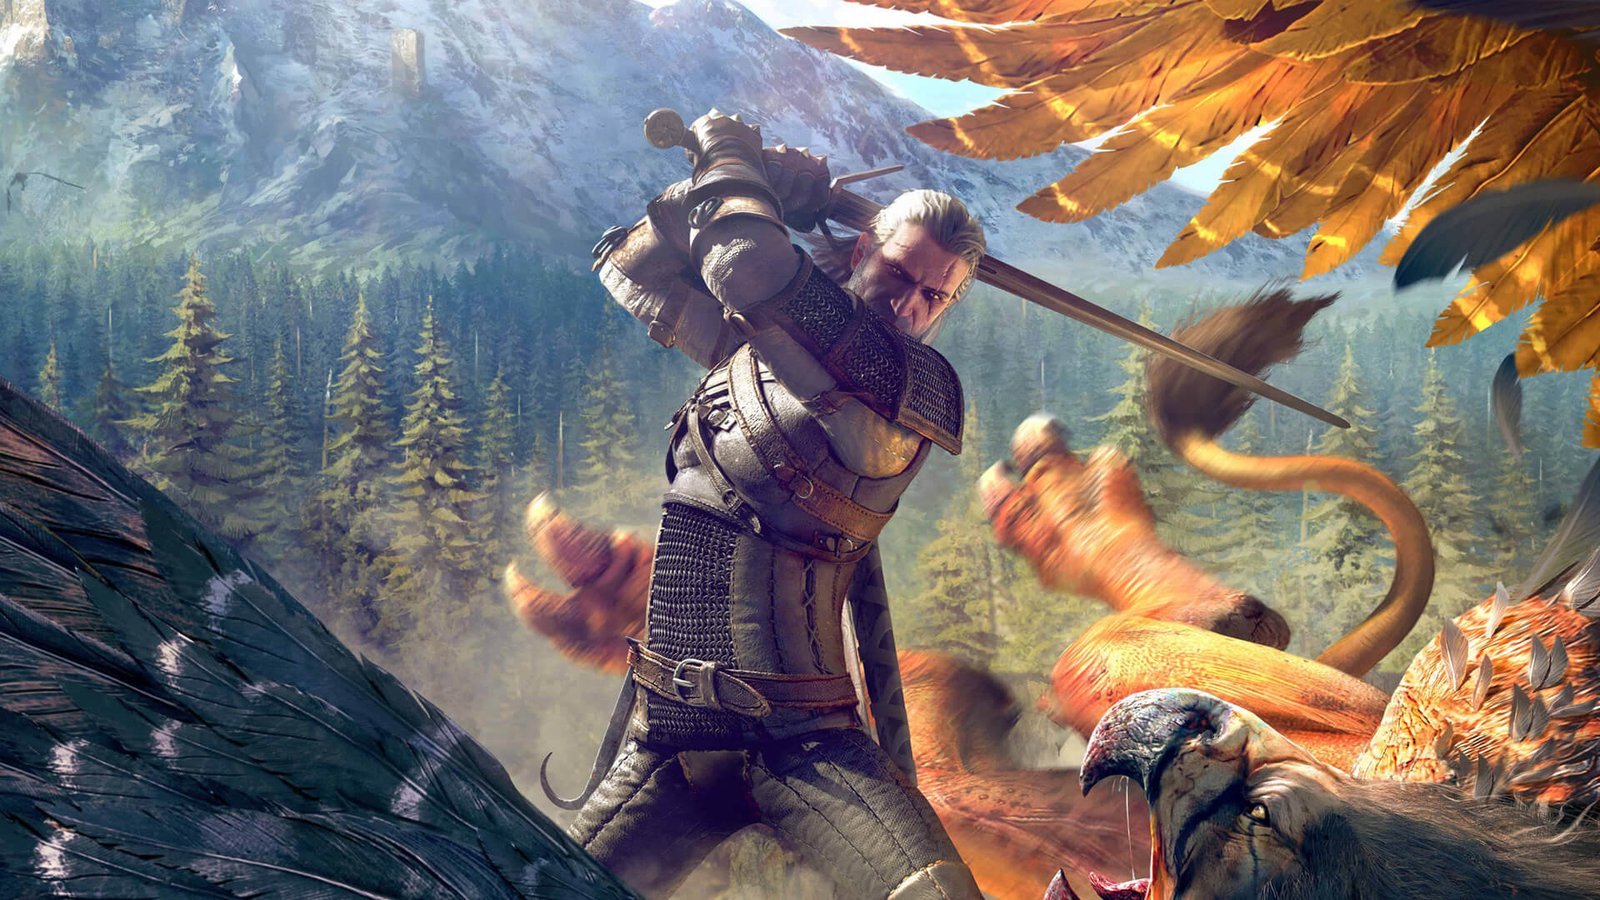 Review – The Witcher 3: Wild Hunt – Complete Edition